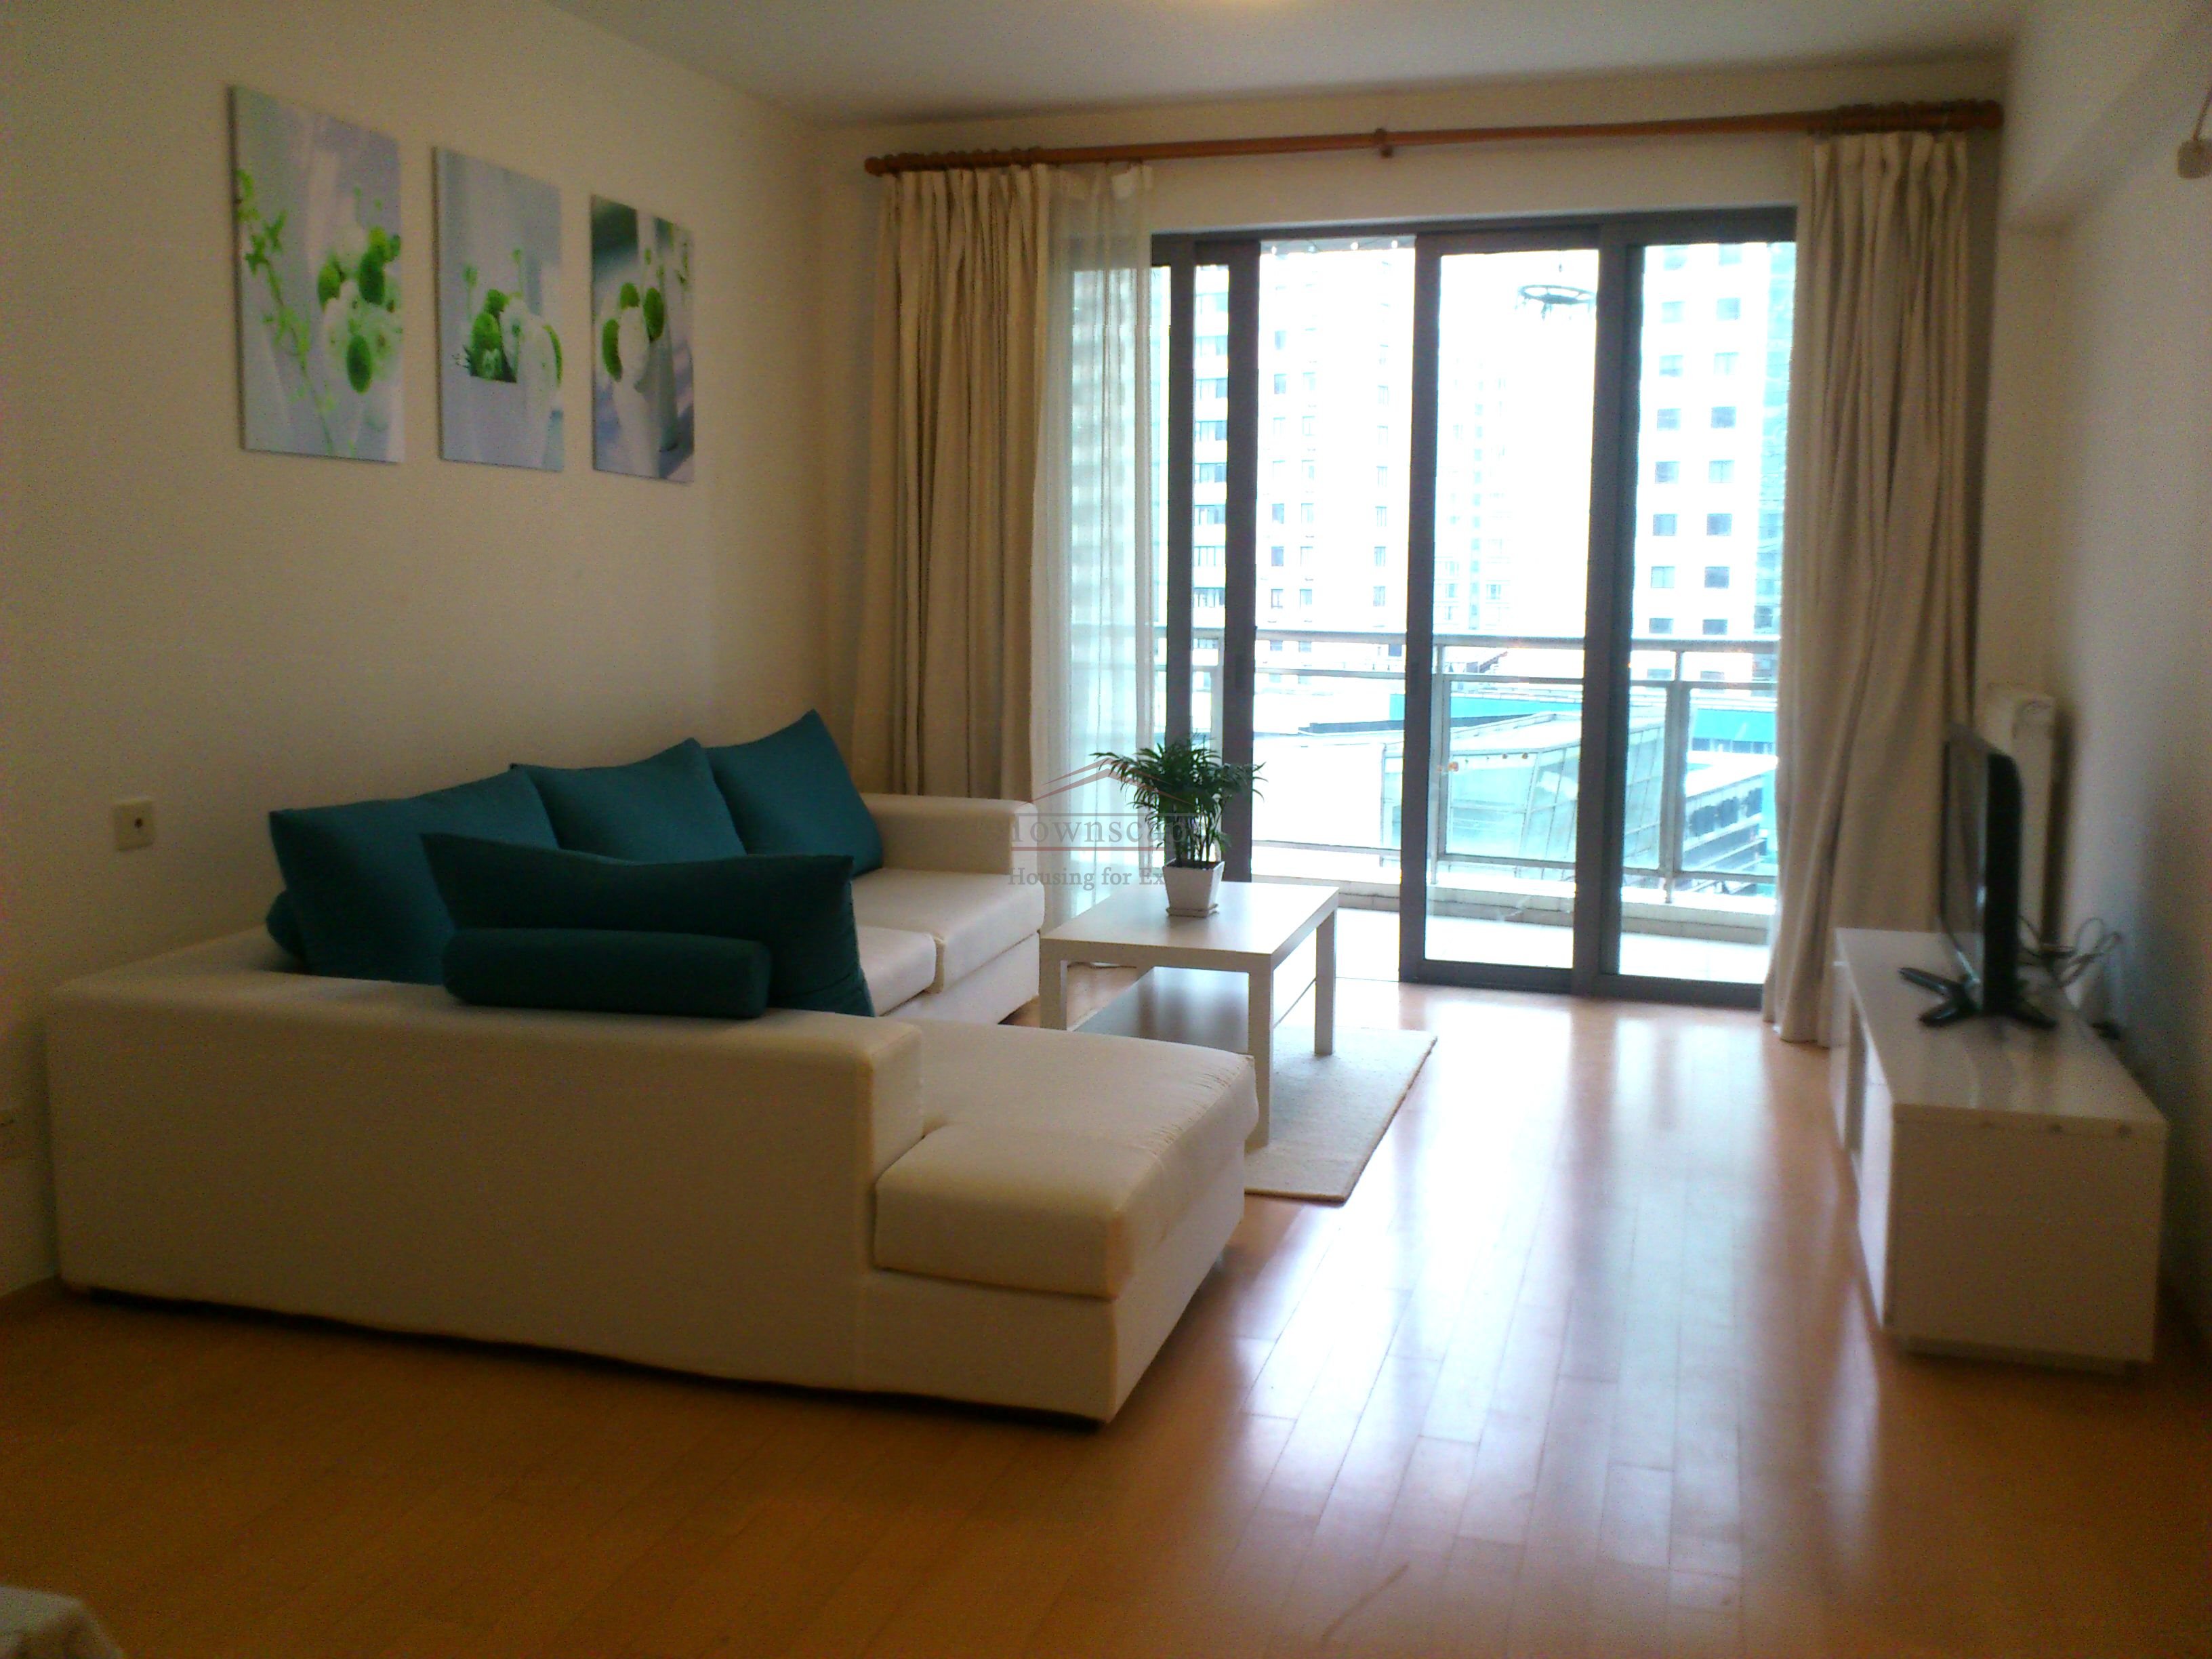 rent comfortable apartment shanghai Bright and cozy 2br apartment in Xujahui